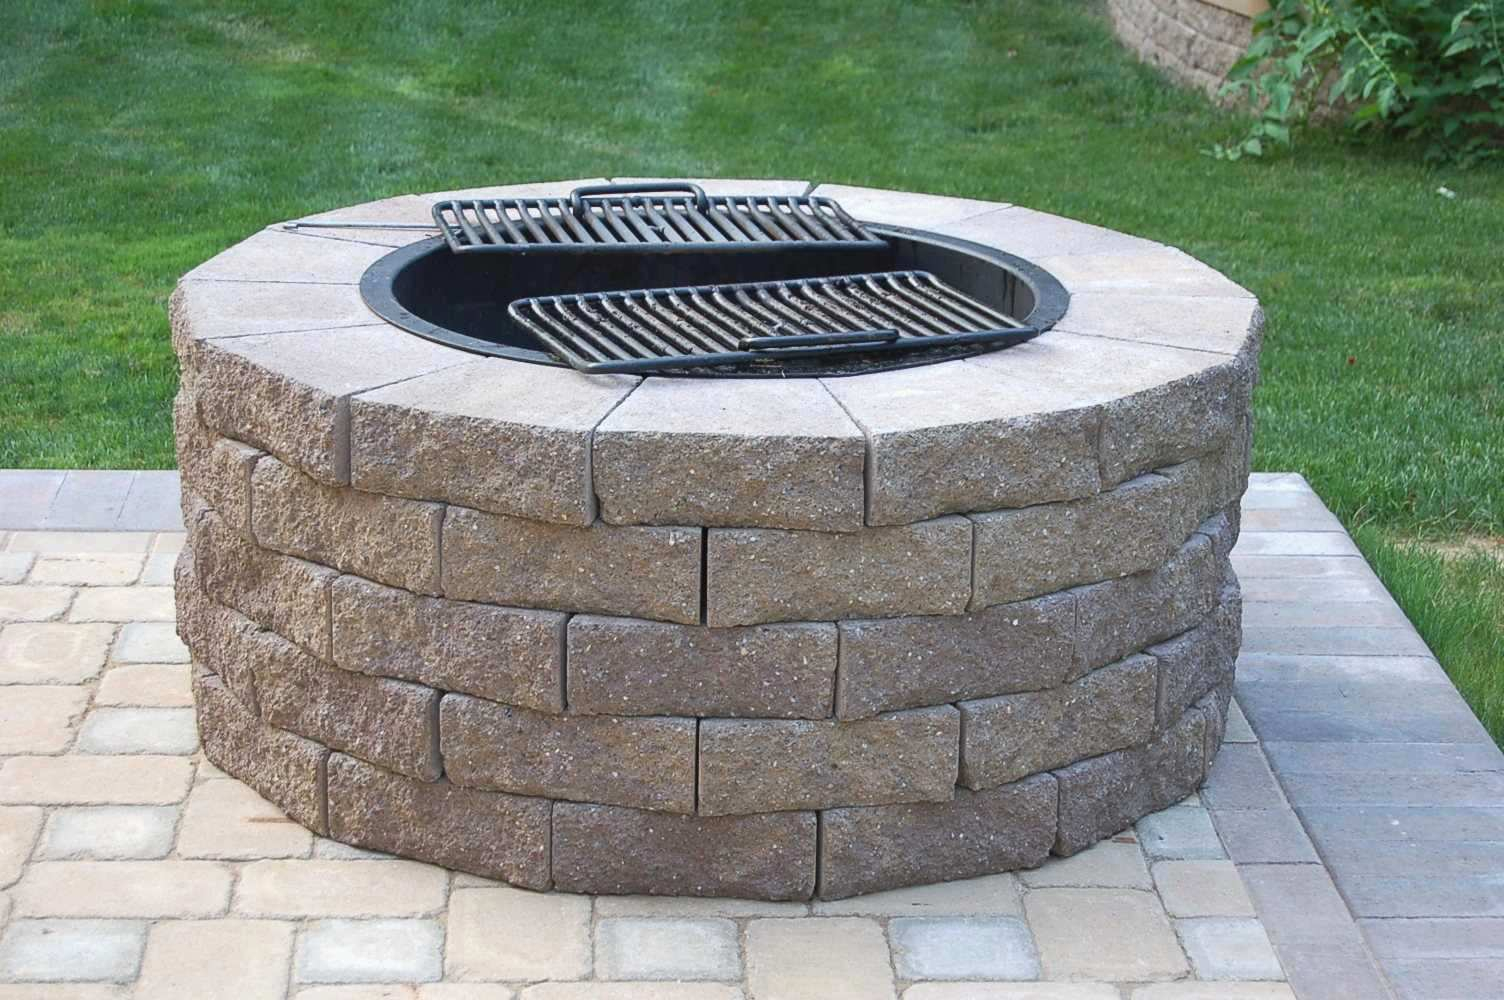 Diy Outdoor Fireplace And Grill Diy Outdoor Fire Pit Grill Fresh intended for size 1504 X 1000